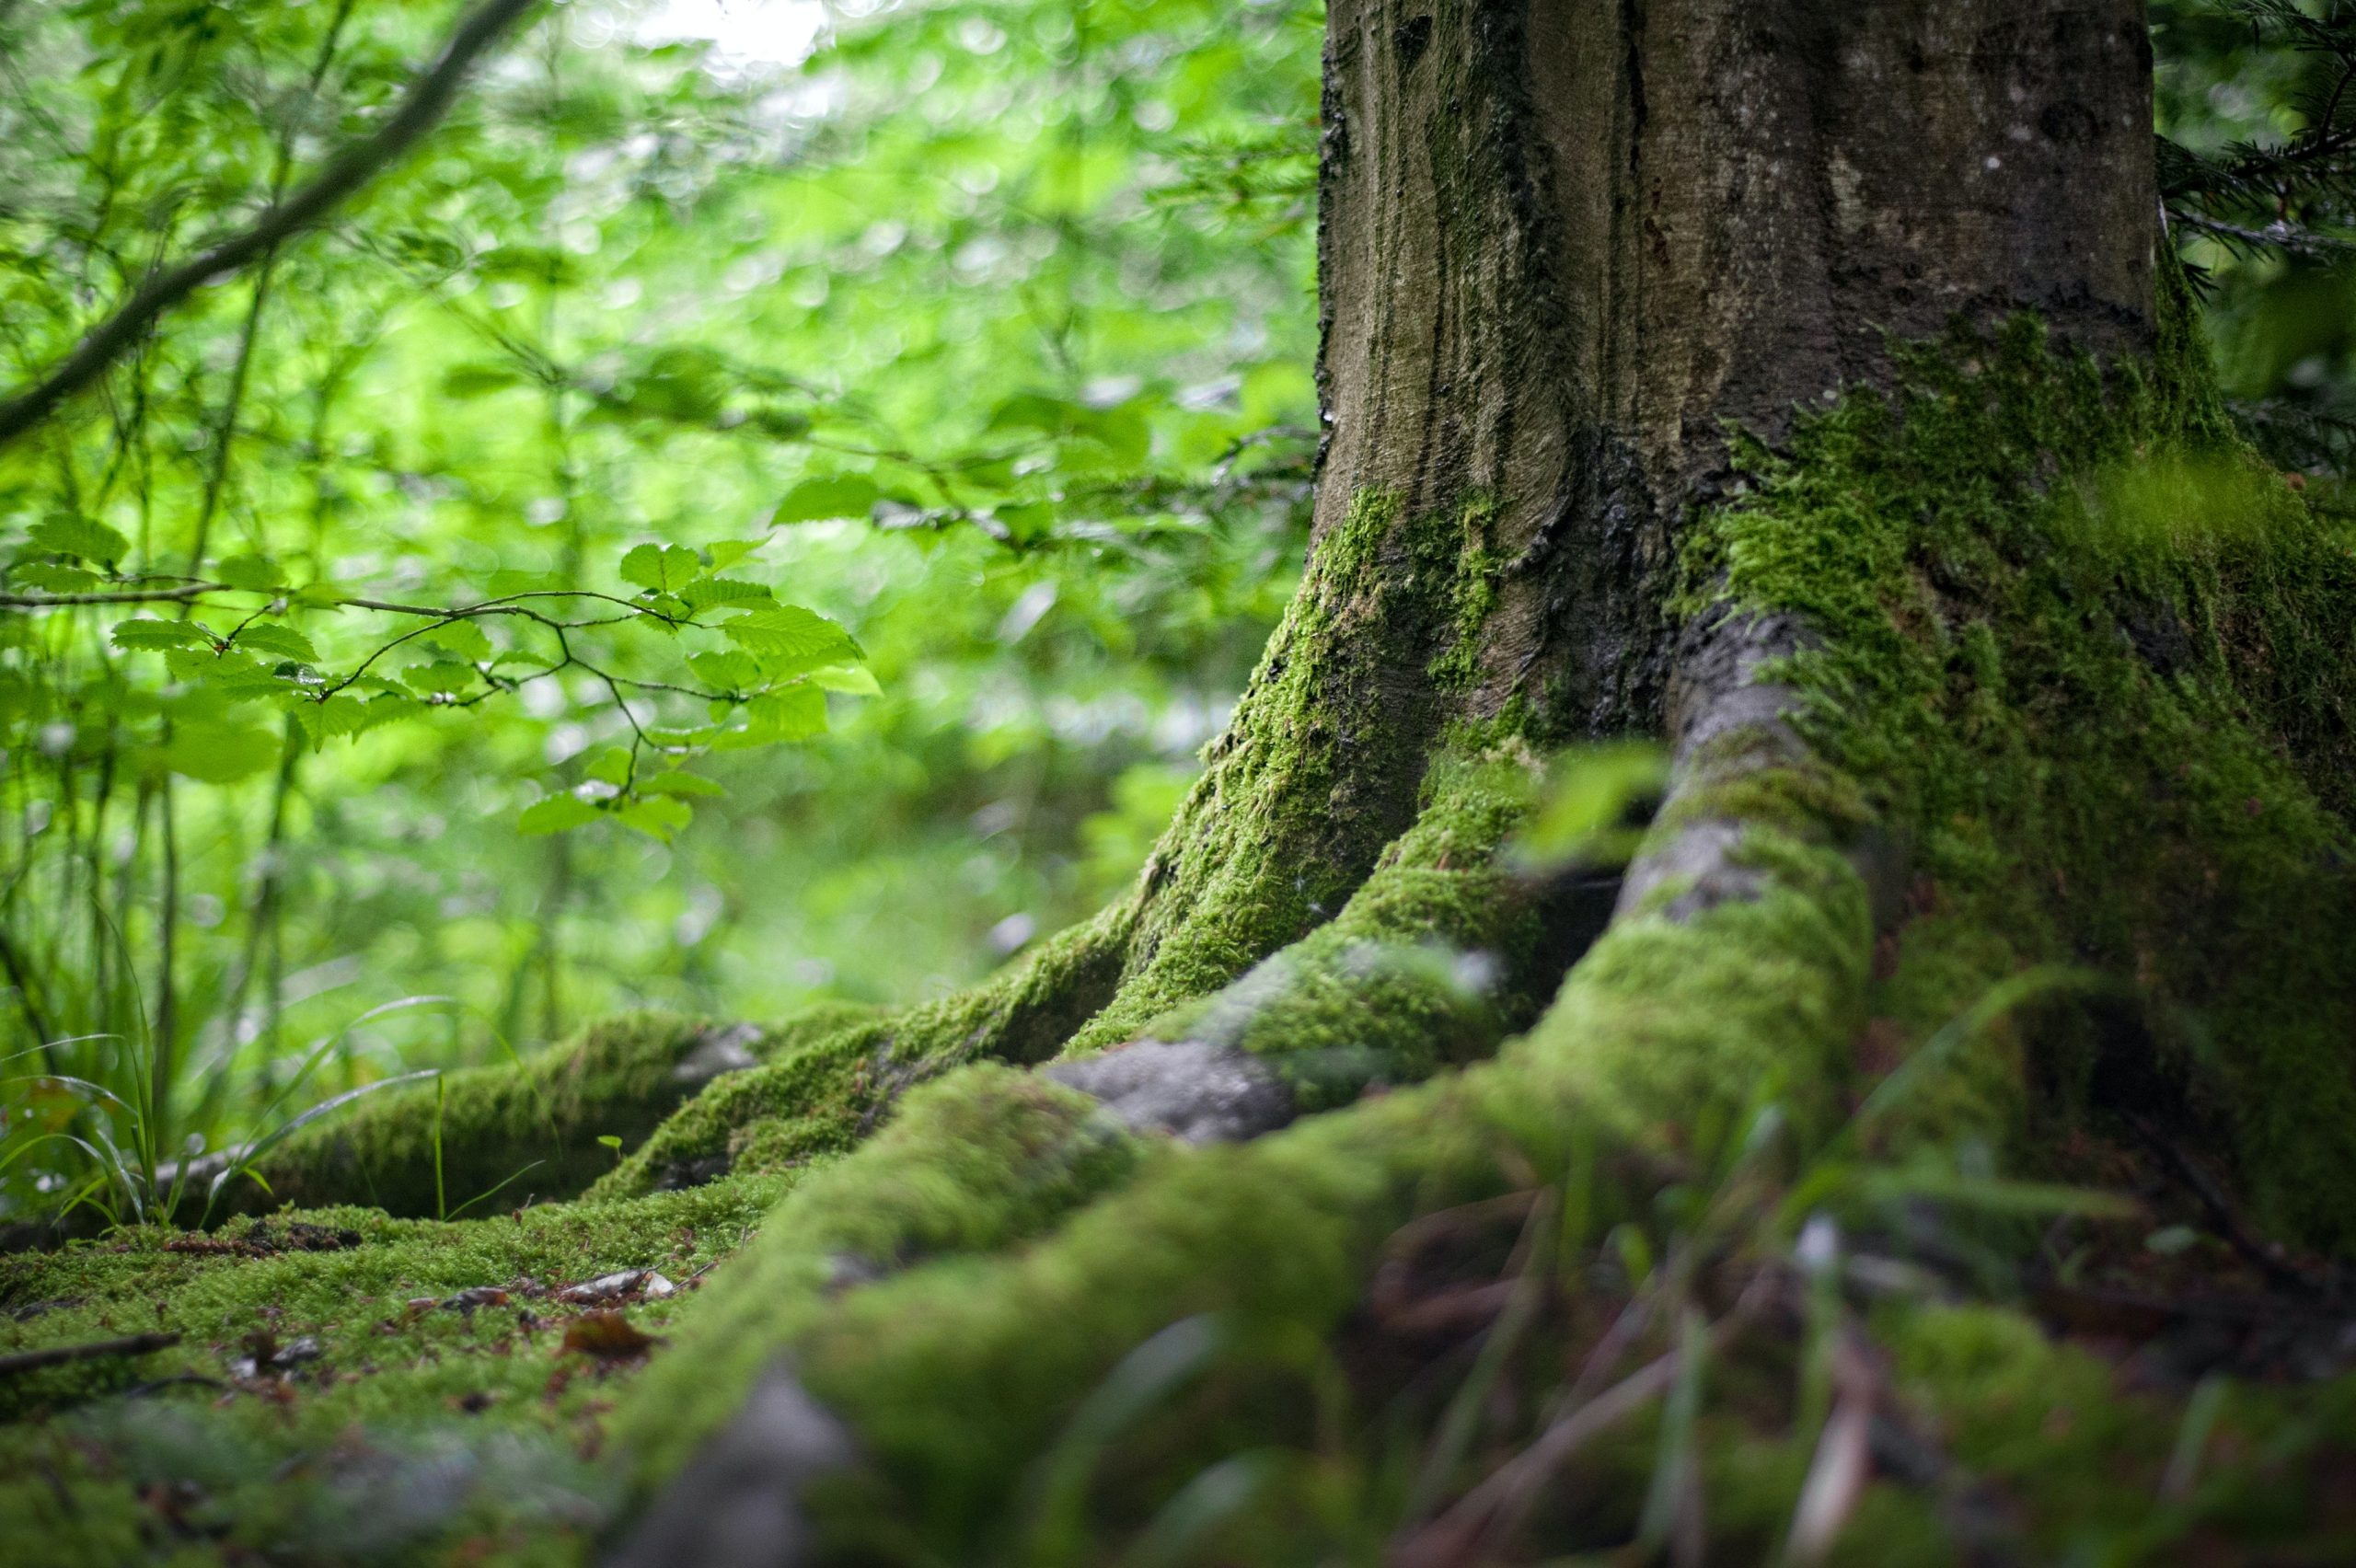 Close up on a moss covered tree trunk in a forest.